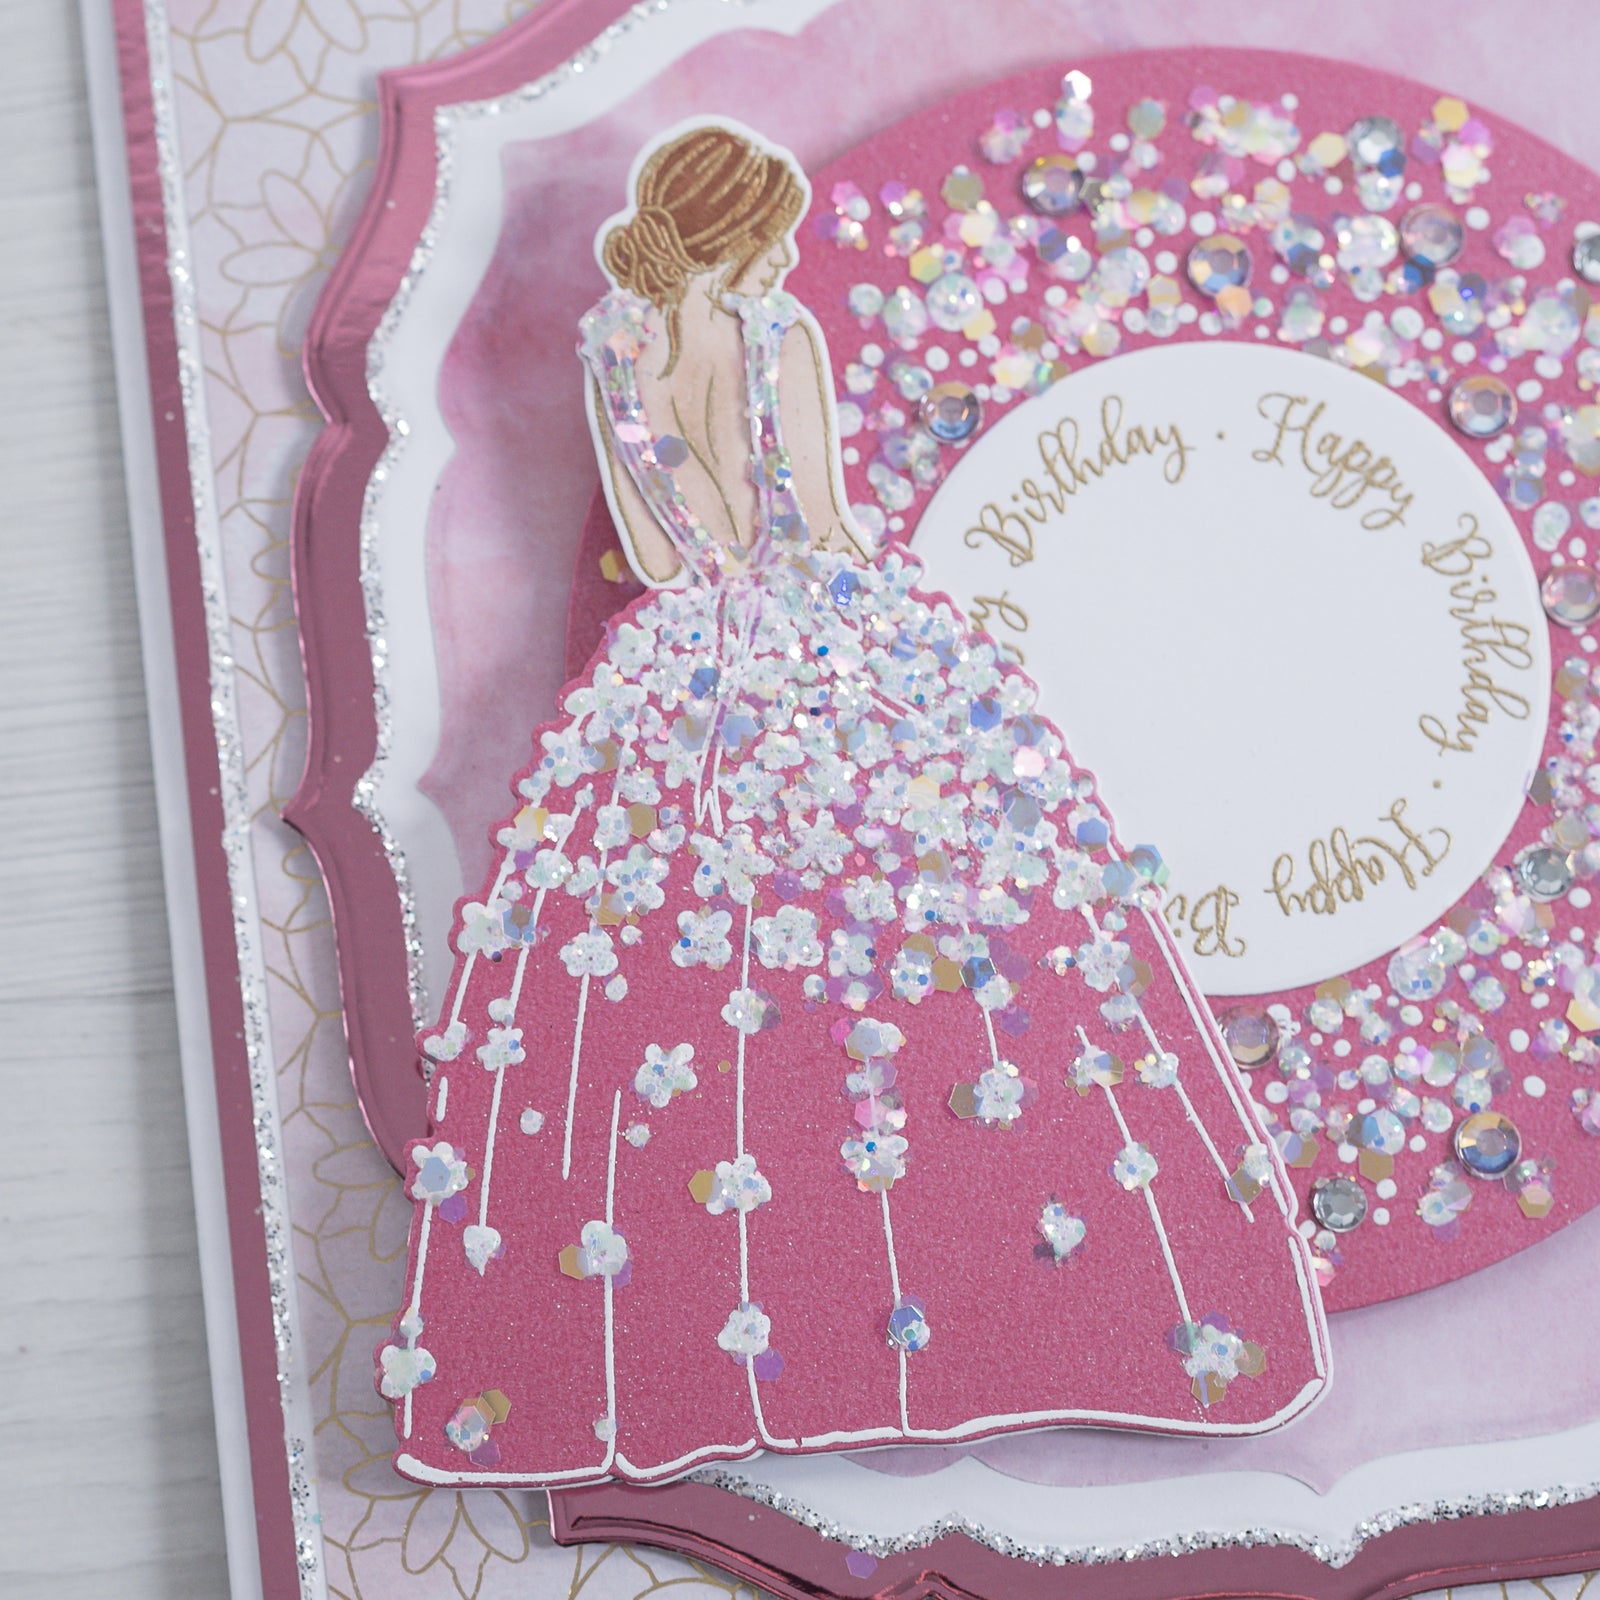 Learn how to make this sparkling pink card using our new Floral Dress stamp to create the silhouette of a lady in a beautiful gown. This card would make the perfect birthday card or wedding card.